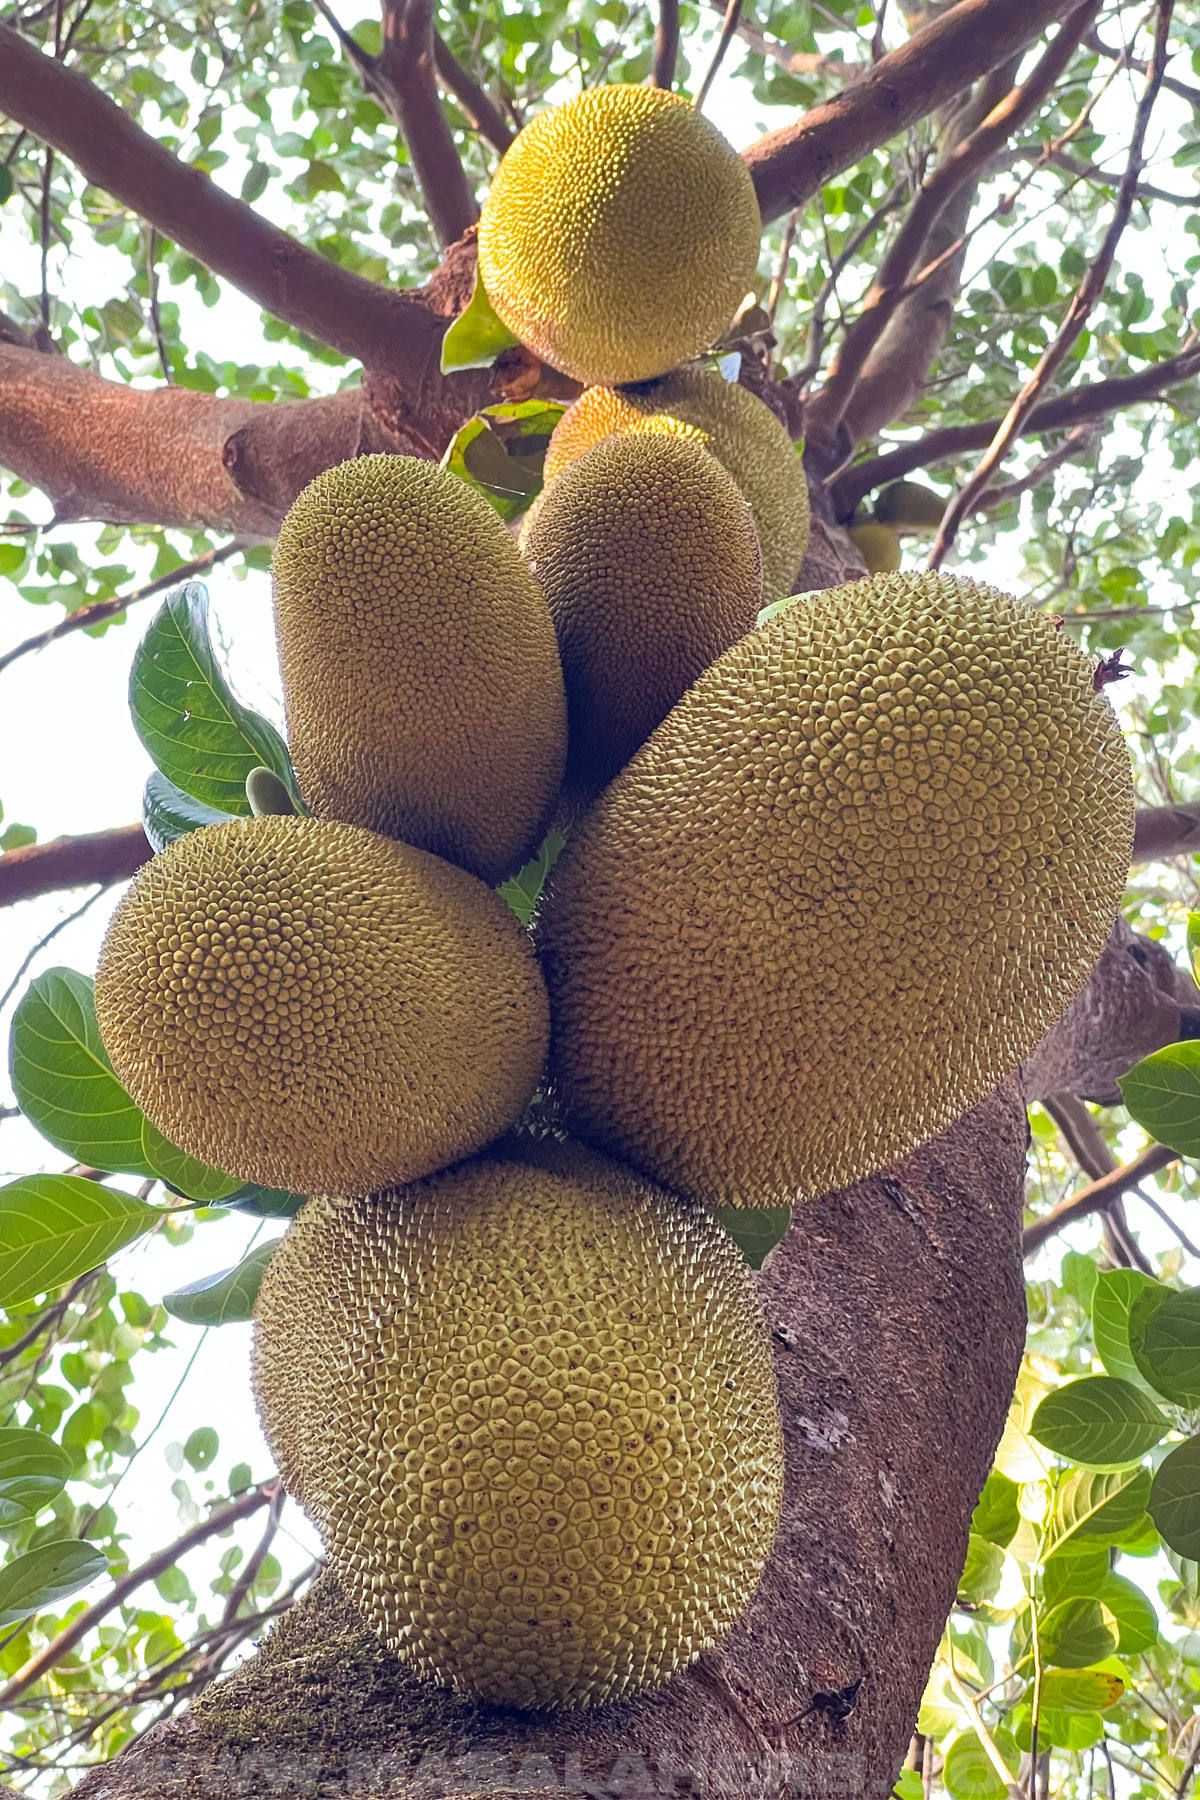 A bunch of breadfruit growing together on a tree